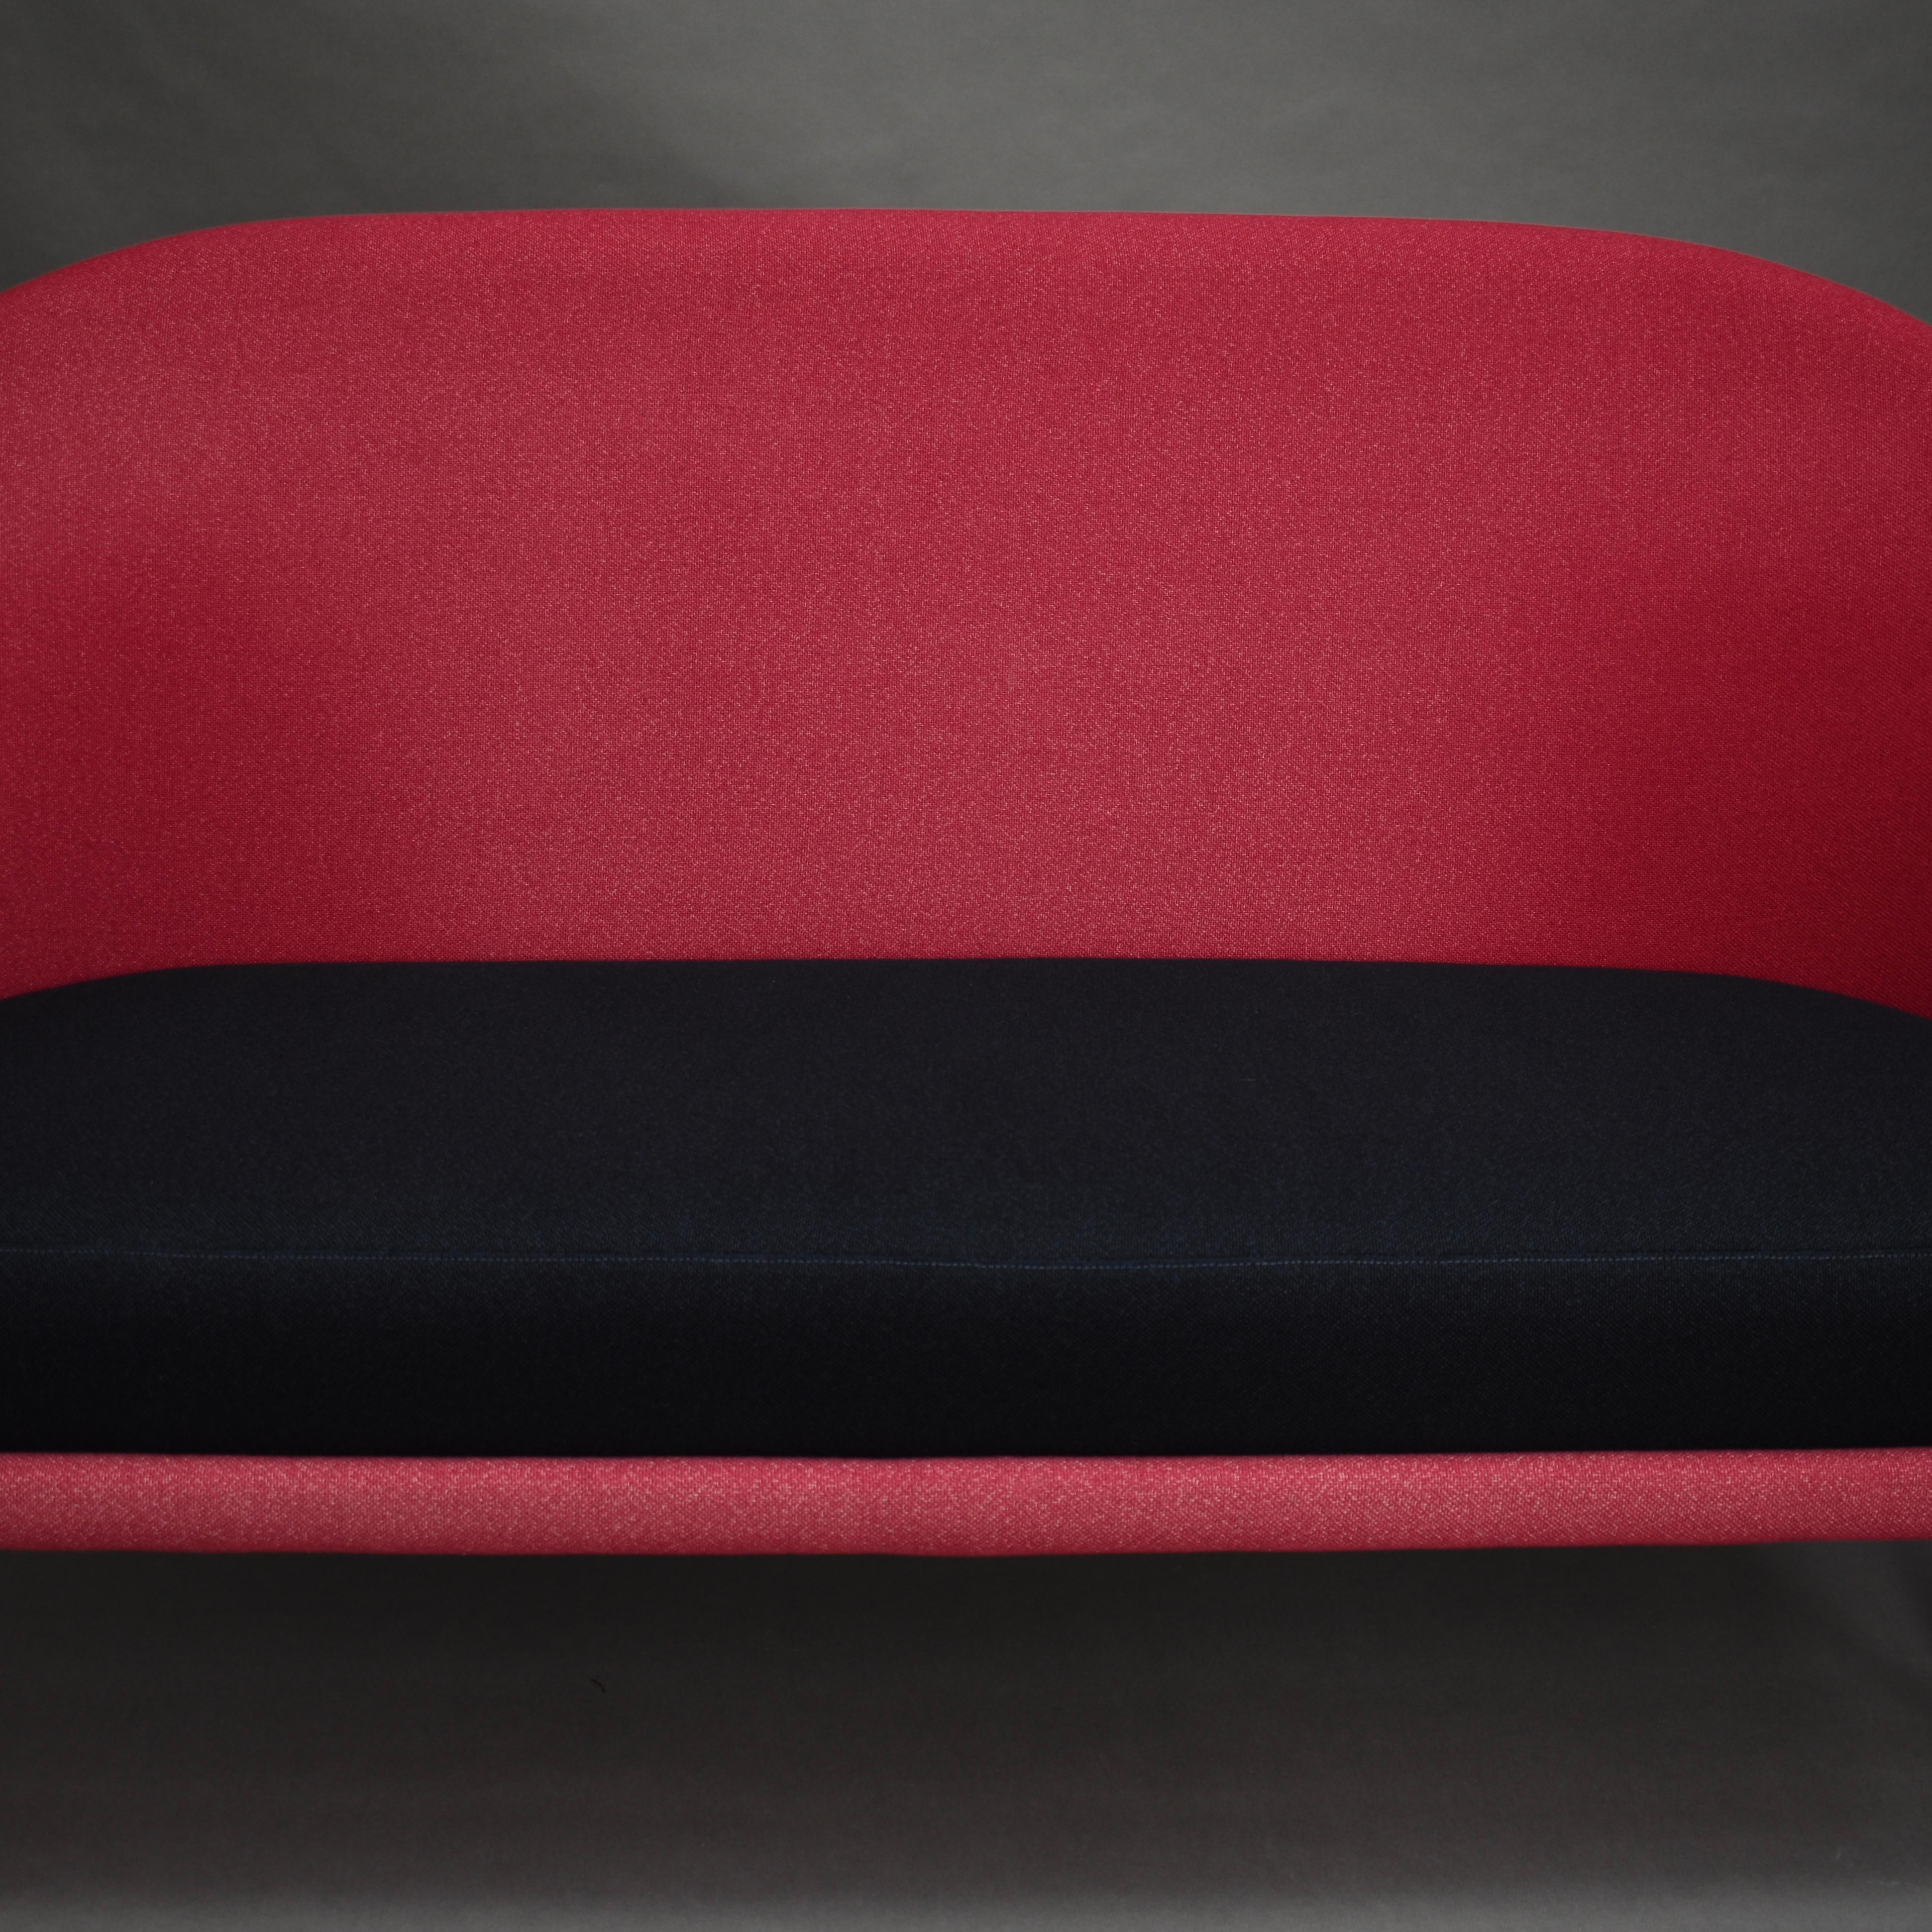 Theo Ruth f815 Sofa by Artifort, Netherlands, 1958 For Sale 3